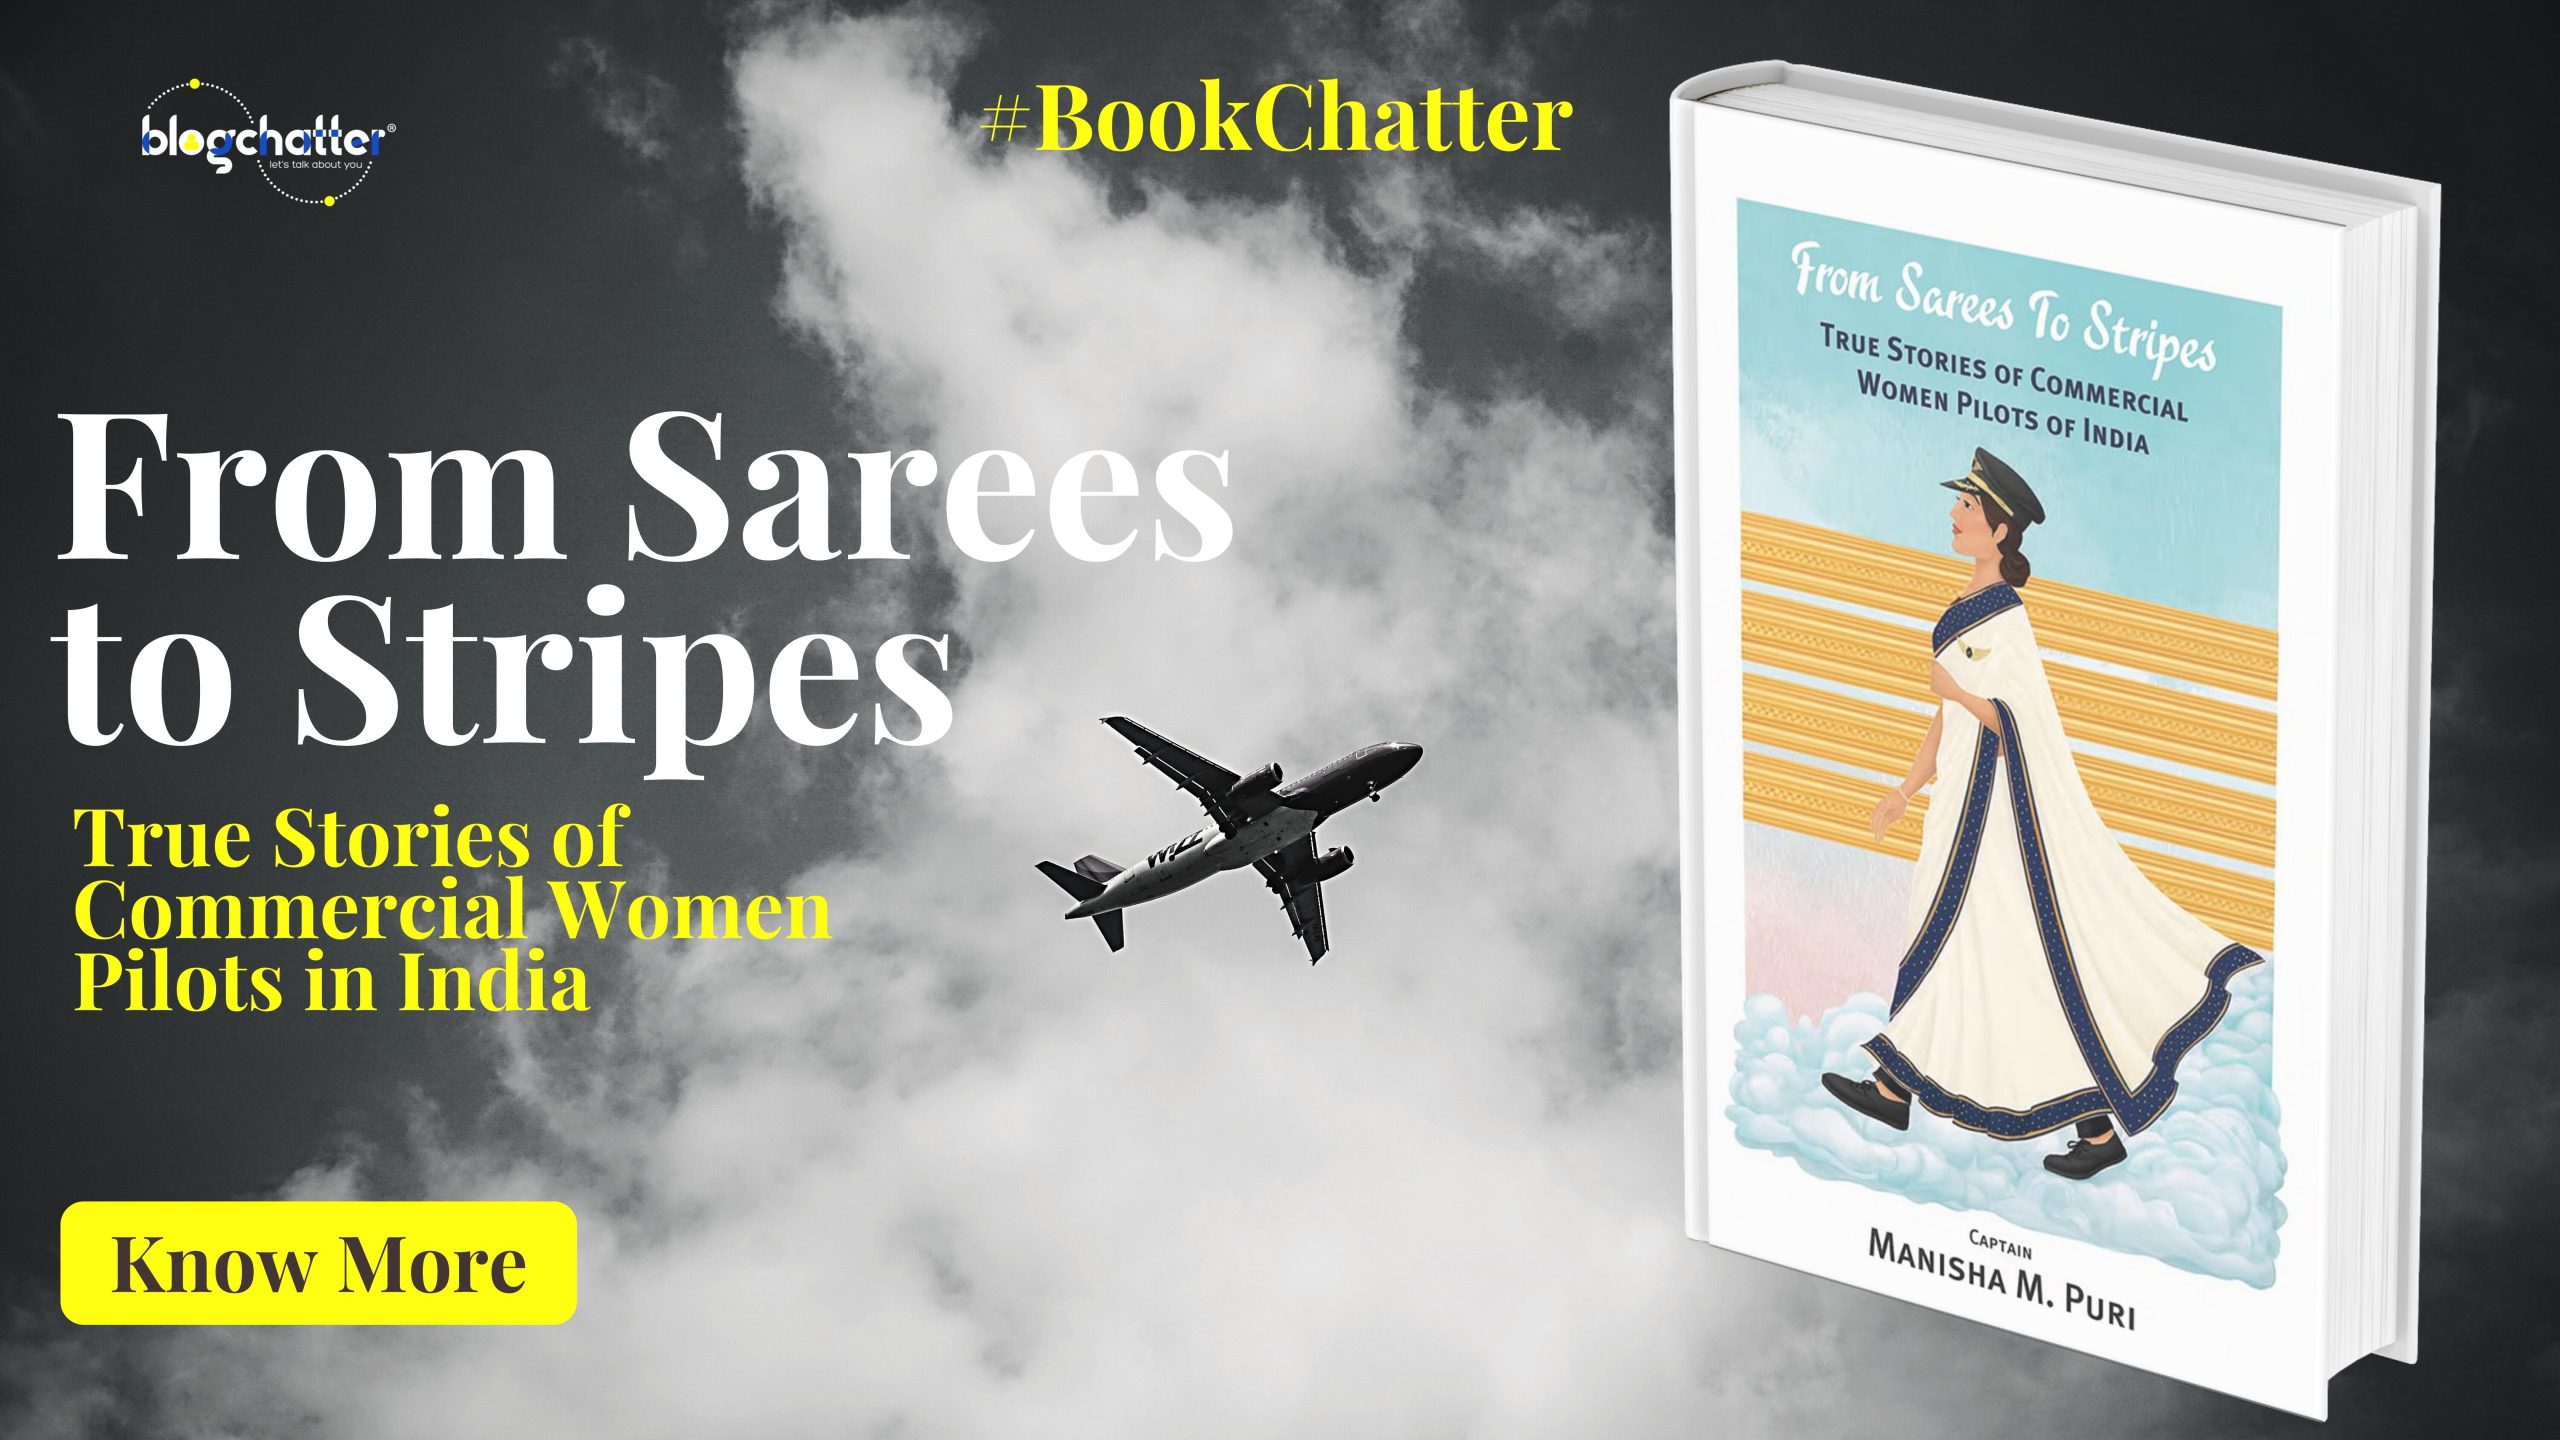 From Sarees to Stripes by Captain Manisha M. Puri